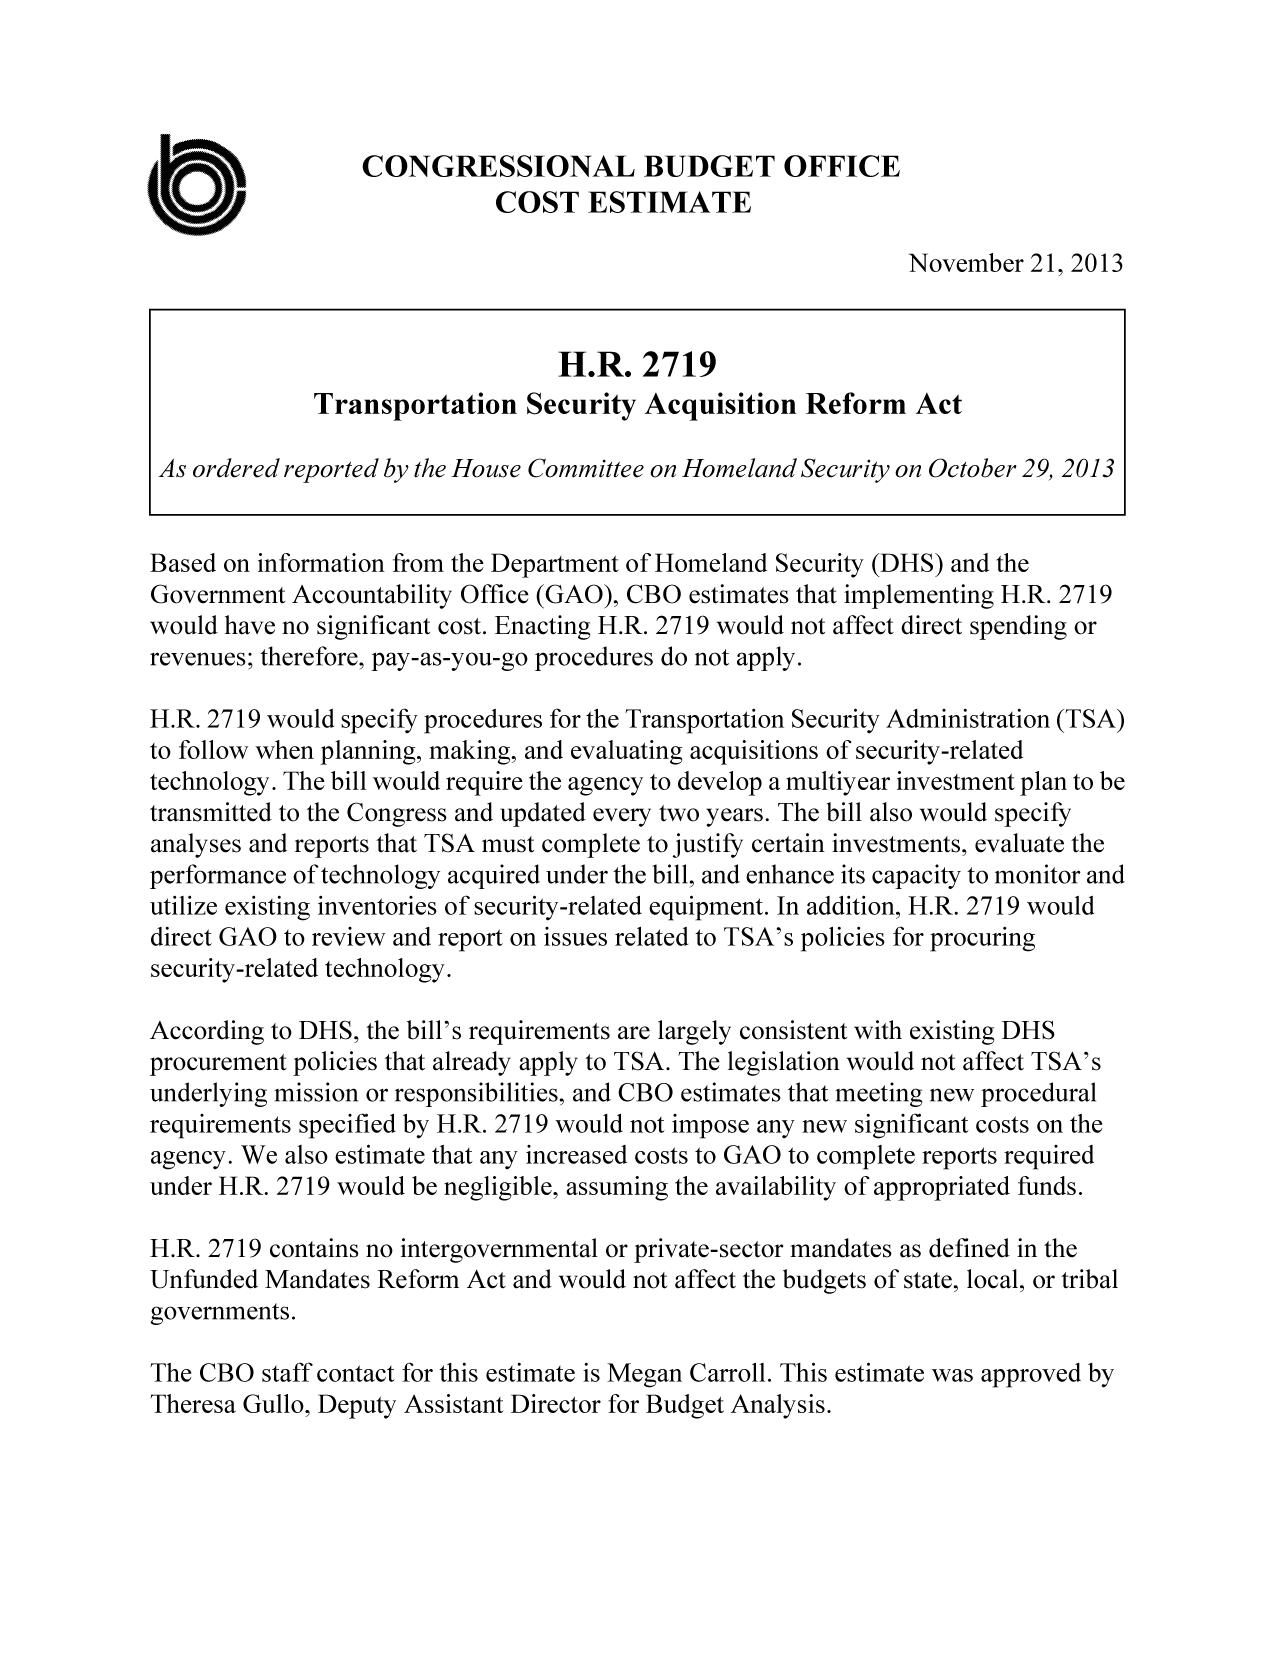 handle is hein.congrec/cbo11410 and id is 1 raw text is: CONGRESSIONAL BUDGET OFFICE
COST ESTIMATE
November 21, 2013
H.R. 2719
Transportation Security Acquisition Reform Act
As ordered reported by the House Committee on Homeland Security on October 29, 2013
Based on information from the Department of Homeland Security (DHS) and the
Government Accountability Office (GAO), CBO estimates that implementing H.R. 2719
would have no significant cost. Enacting H.R. 2719 would not affect direct spending or
revenues; therefore, pay-as-you-go procedures do not apply.
H.R. 2719 would specify procedures for the Transportation Security Administration (TSA)
to follow when planning, making, and evaluating acquisitions of security-related
technology. The bill would require the agency to develop a multiyear investment plan to be
transmitted to the Congress and updated every two years. The bill also would specify
analyses and reports that TSA must complete to justify certain investments, evaluate the
performance of technology acquired under the bill, and enhance its capacity to monitor and
utilize existing inventories of security-related equipment. In addition, H.R. 2719 would
direct GAO to review and report on issues related to TSA's policies for procuring
security-related technology.
According to DHS, the bill's requirements are largely consistent with existing DHS
procurement policies that already apply to TSA. The legislation would not affect TSA's
underlying mission or responsibilities, and CBO estimates that meeting new procedural
requirements specified by H.R. 2719 would not impose any new significant costs on the
agency. We also estimate that any increased costs to GAO to complete reports required
under H.R. 2719 would be negligible, assuming the availability of appropriated funds.
H.R. 2719 contains no intergovernmental or private-sector mandates as defined in the
Unfunded Mandates Reform Act and would not affect the budgets of state, local, or tribal
governments.
The CBO staff contact for this estimate is Megan Carroll. This estimate was approved by
Theresa Gullo, Deputy Assistant Director for Budget Analysis.


